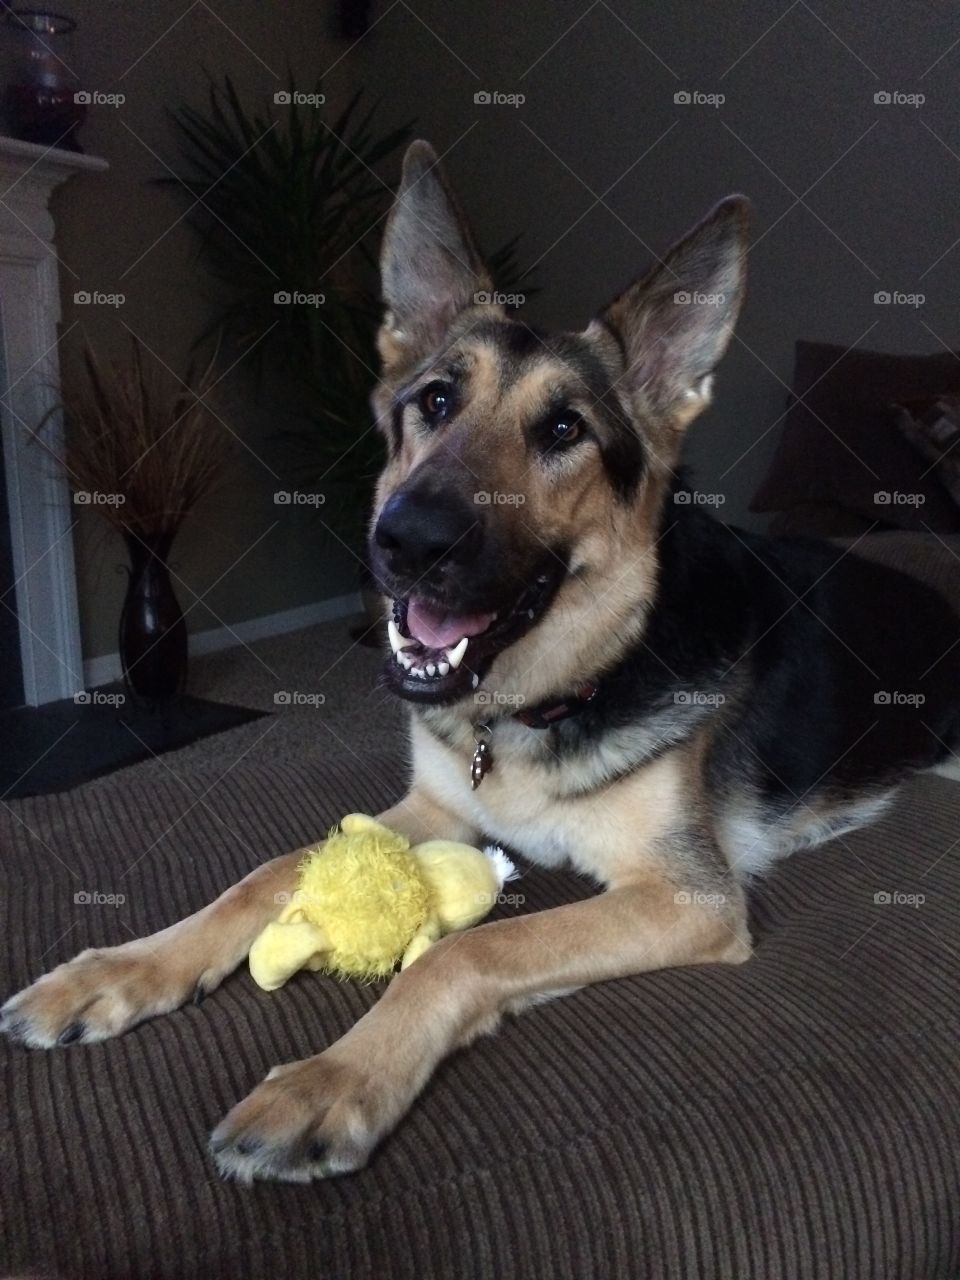 For Easter I got a ducky, do you want to play?